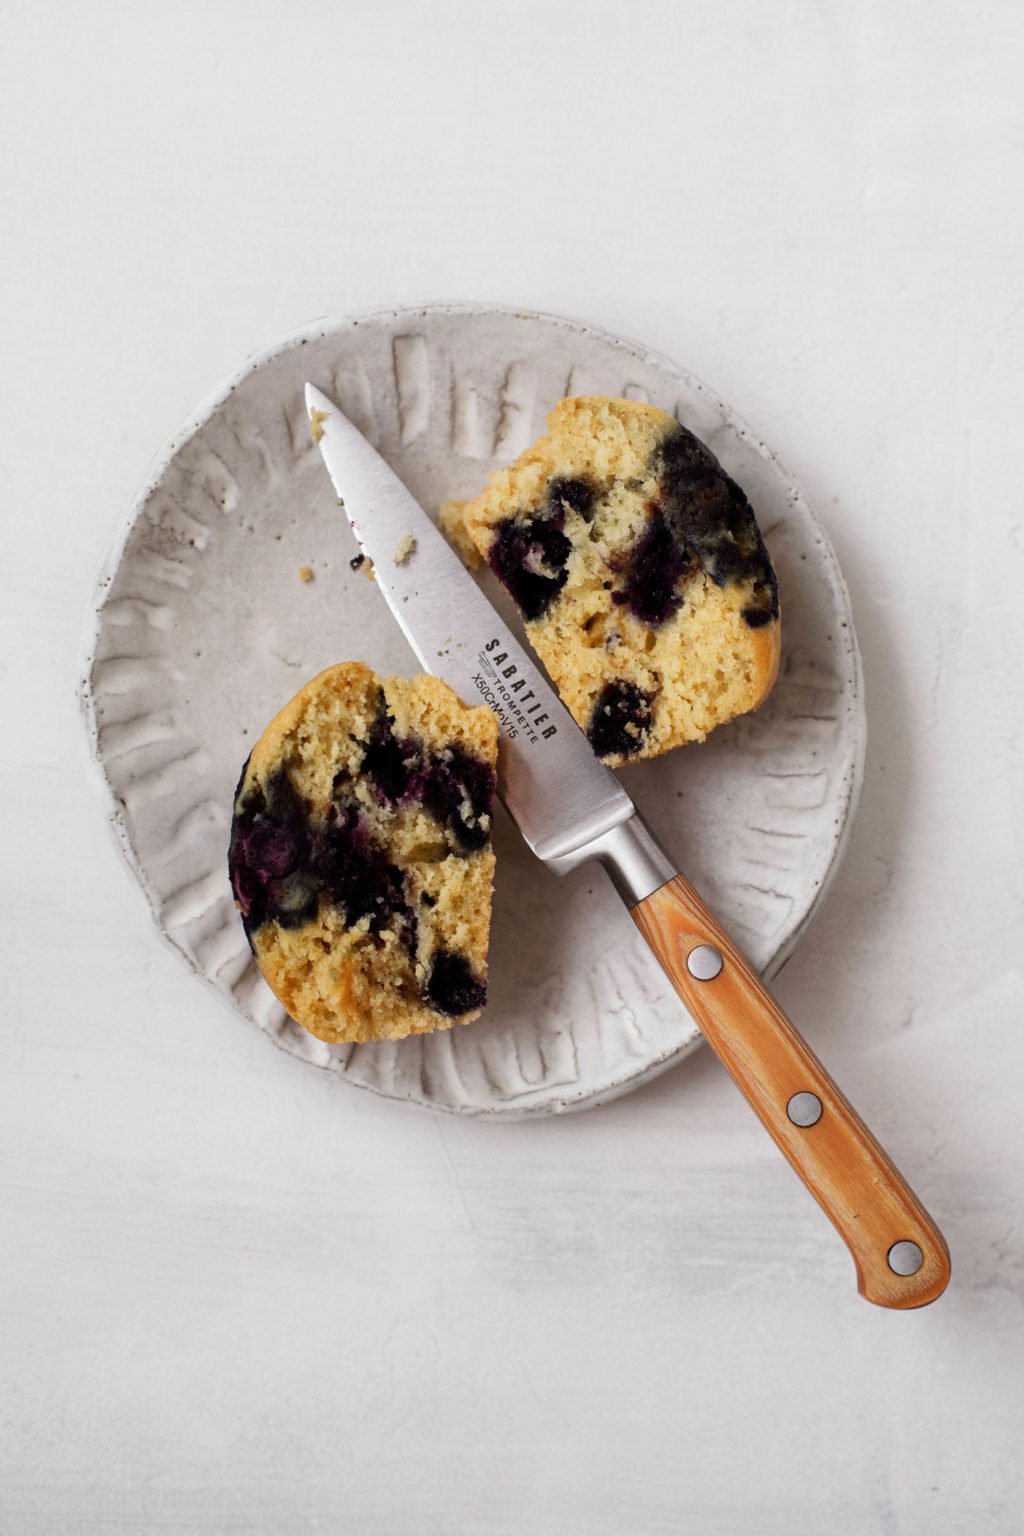 An overhead image of a fruit muffin that has just been sliced in half. The cut halves are on a small dessert plate with a paring knife.